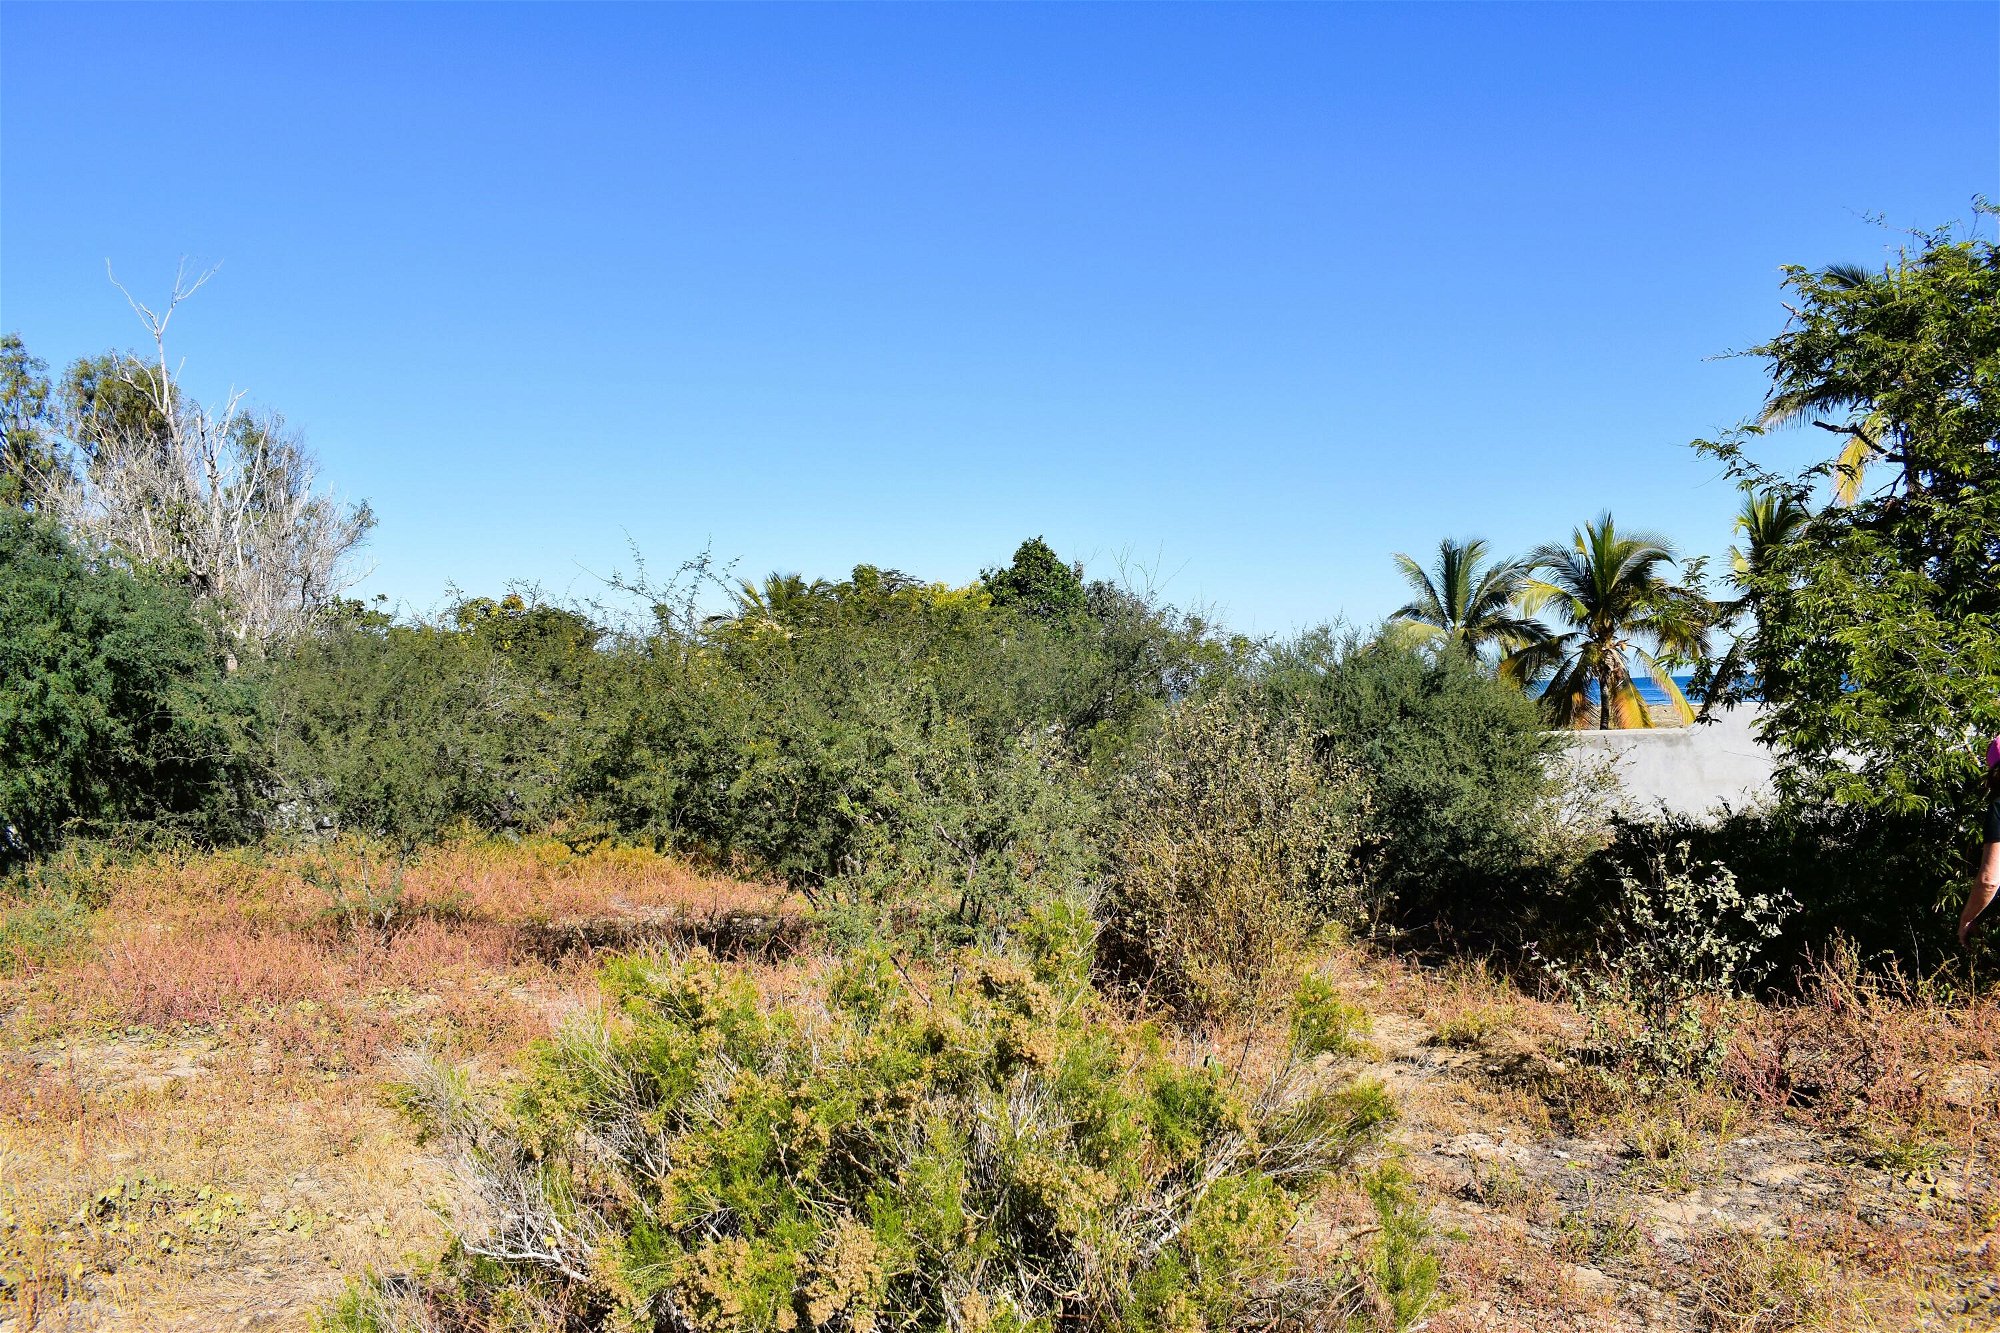 Land For Sale in Cabo San Lucas 994331000